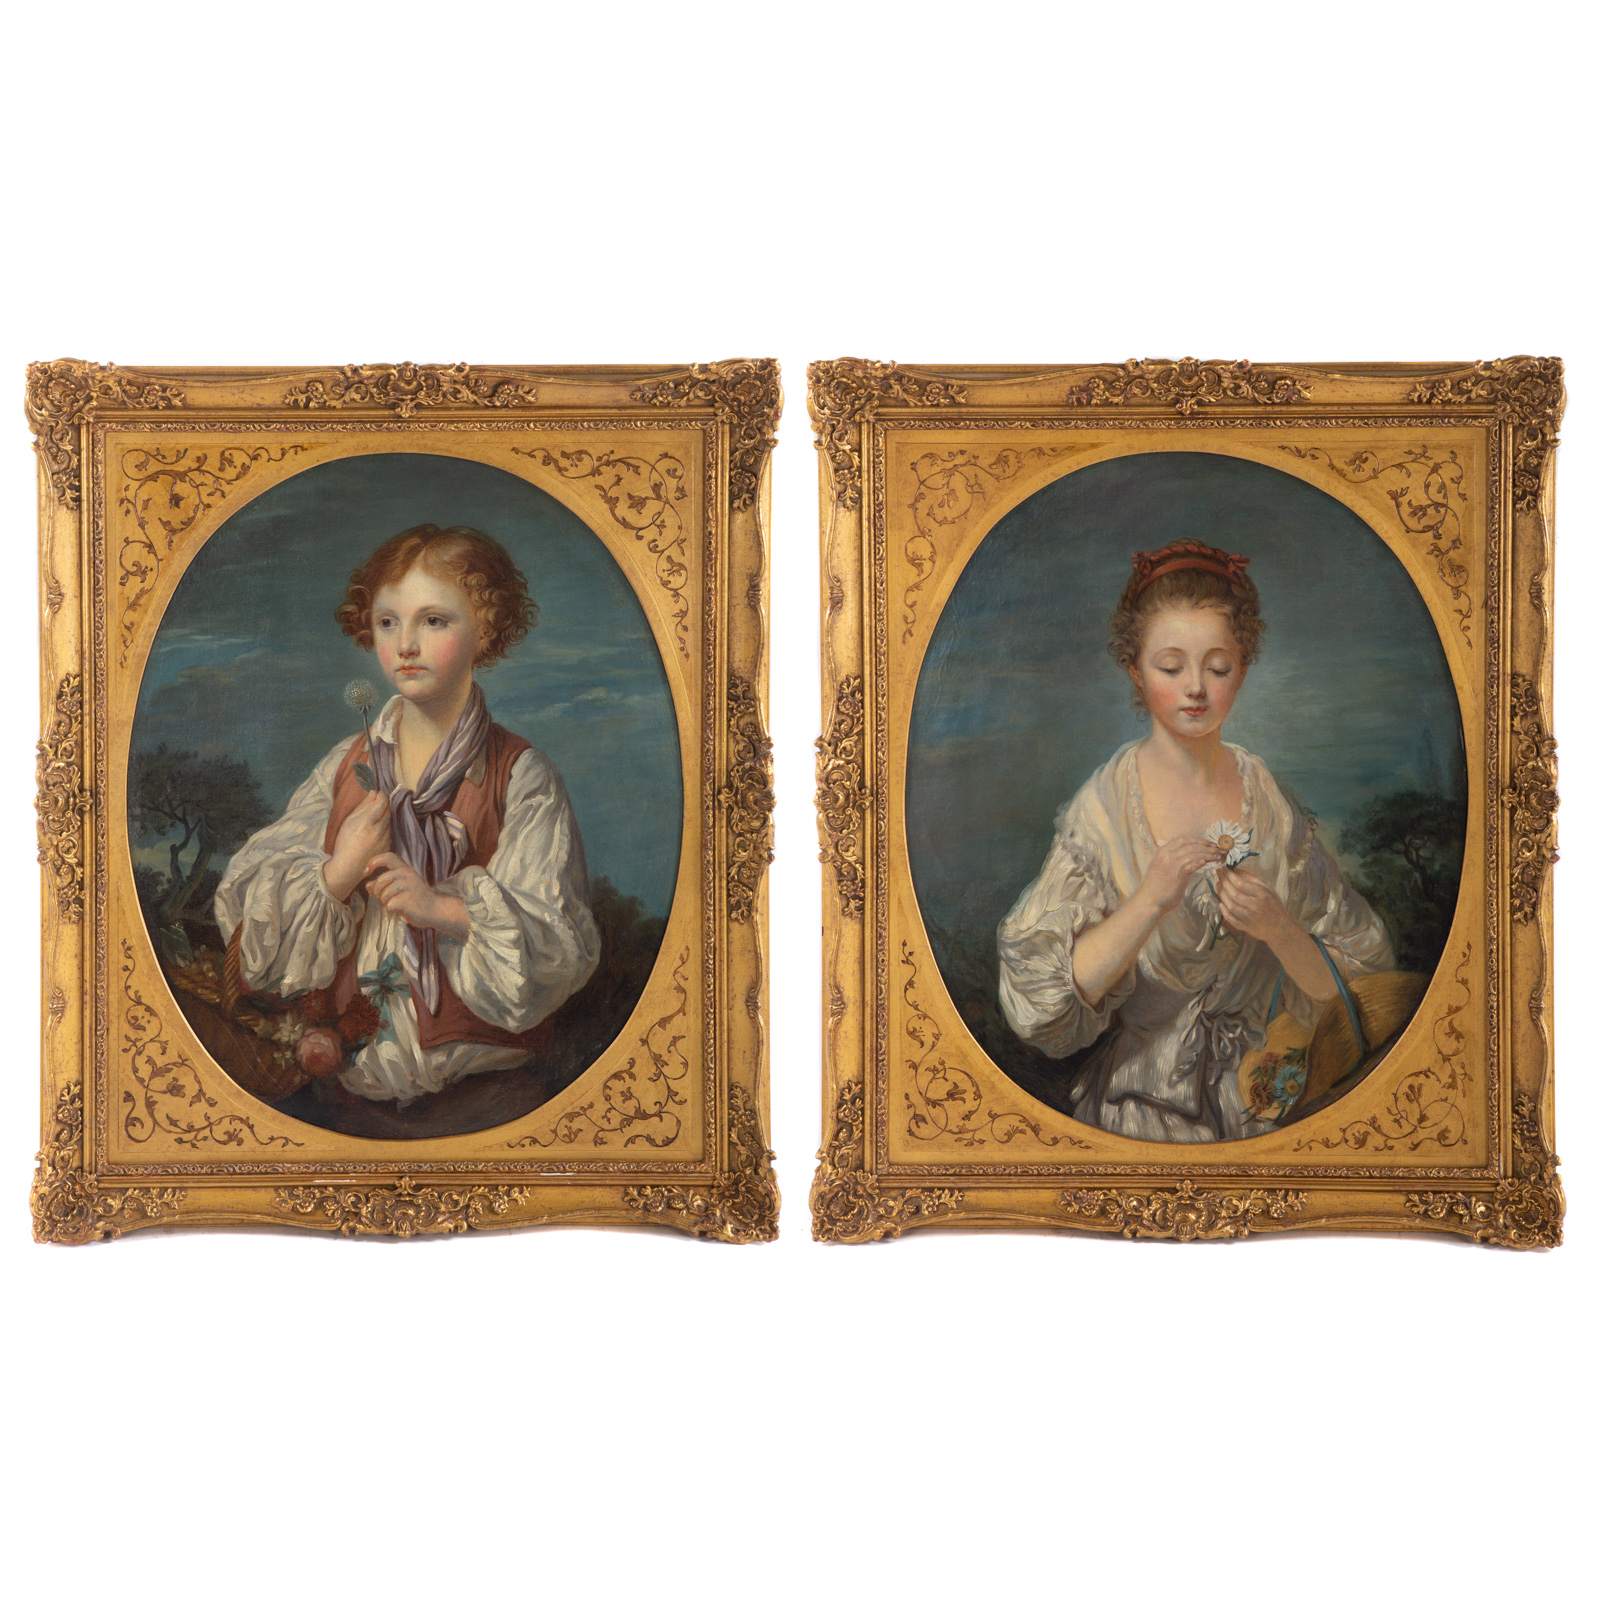 FRENCH SCHOOL 18TH C PAIR OF 369a07